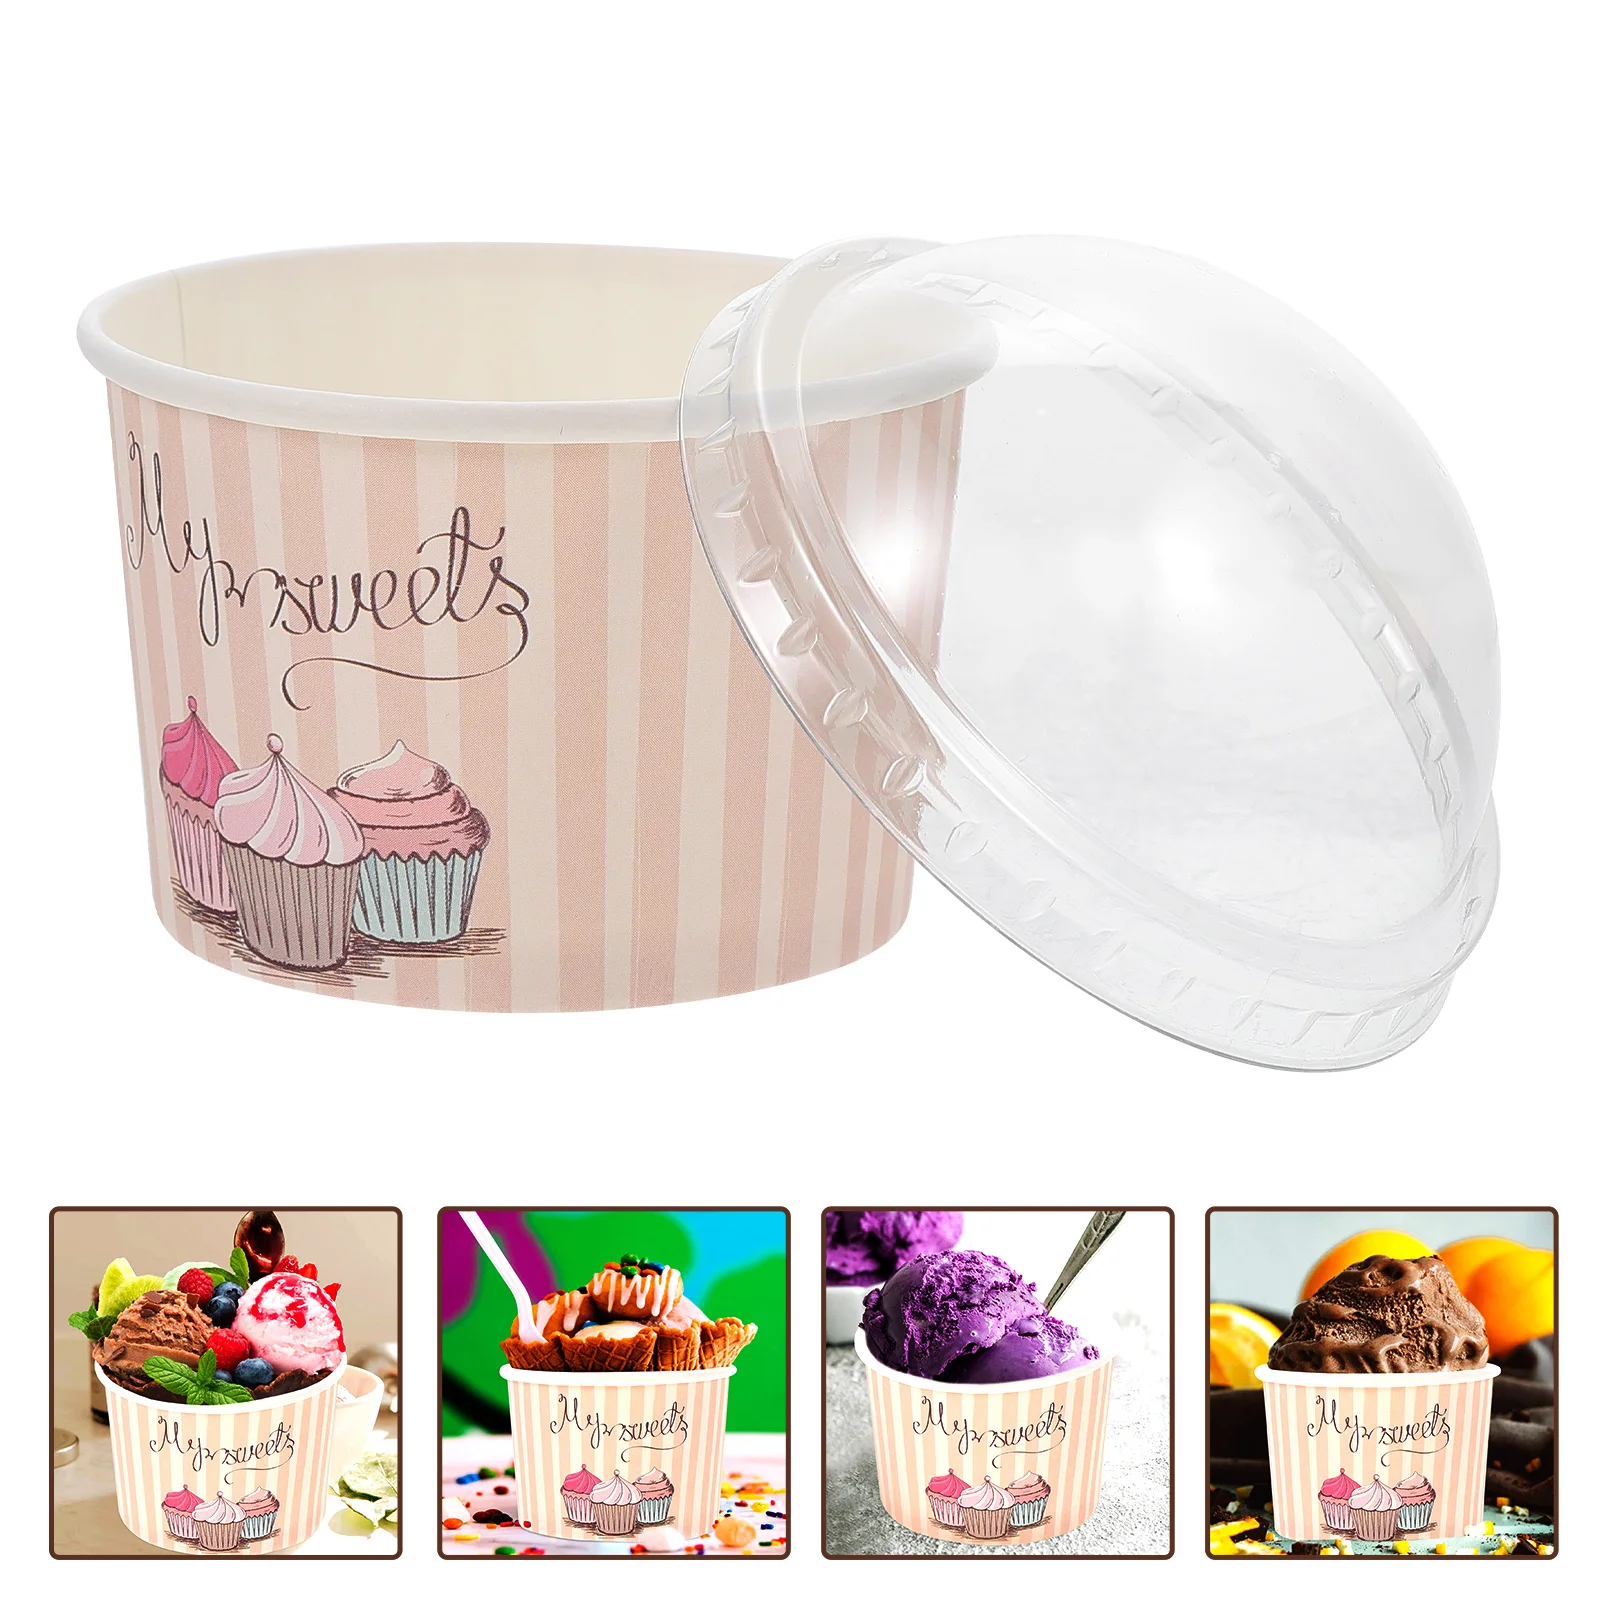 

Paper Cup Cups Ice Cream Dessert Yogurt Bowl Bowls Cake Sundae Disposable Container Pudding Treat Lids Lid Containers Party